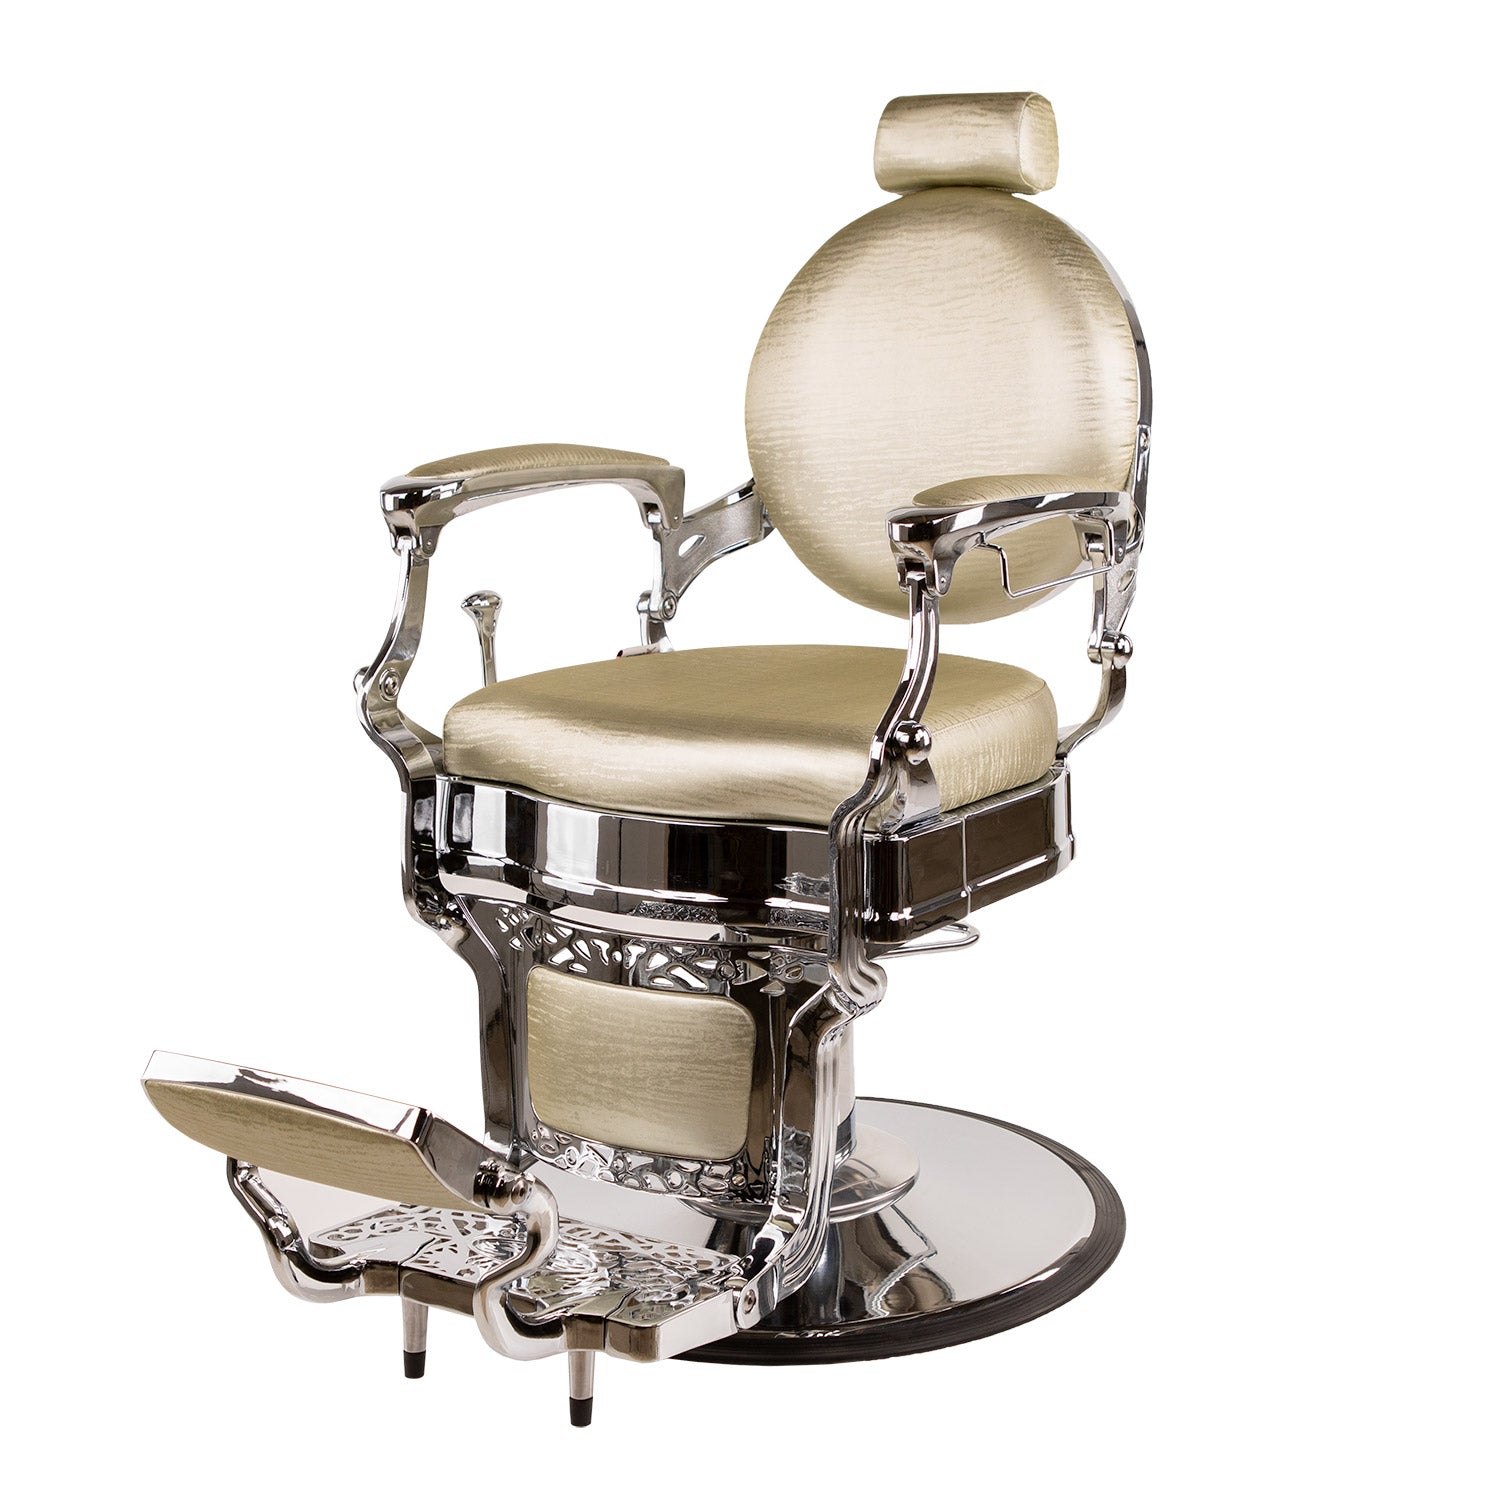 Princeton Barber Chair - Collins - Salon Equipment and Barber Equipment